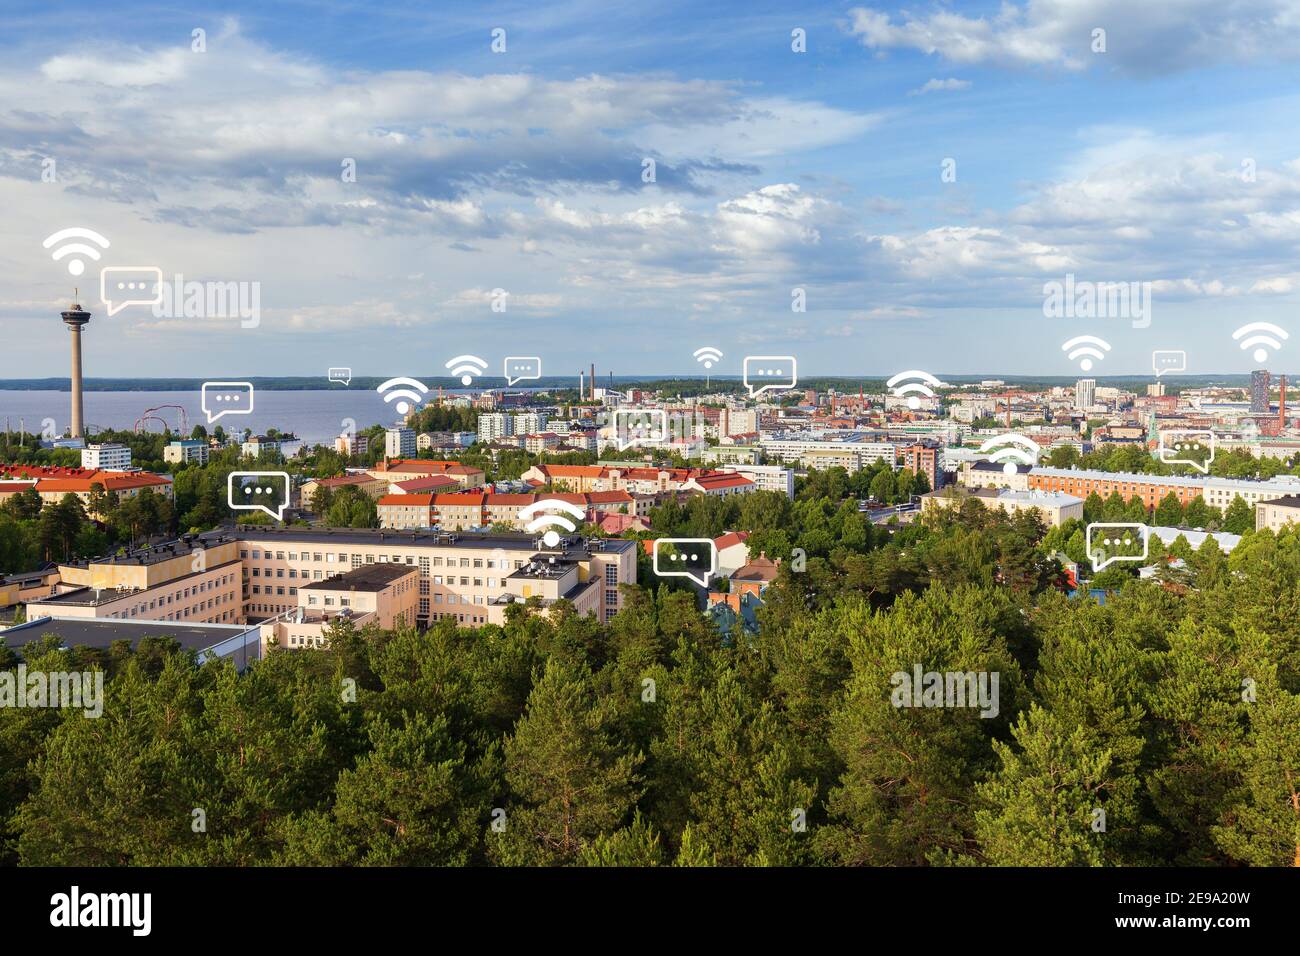 City of Tampere, Finland, viewed from above on a sunny day in the summer. Wireless network connection, WiFi, smart city and online messaging concept. Stock Photo